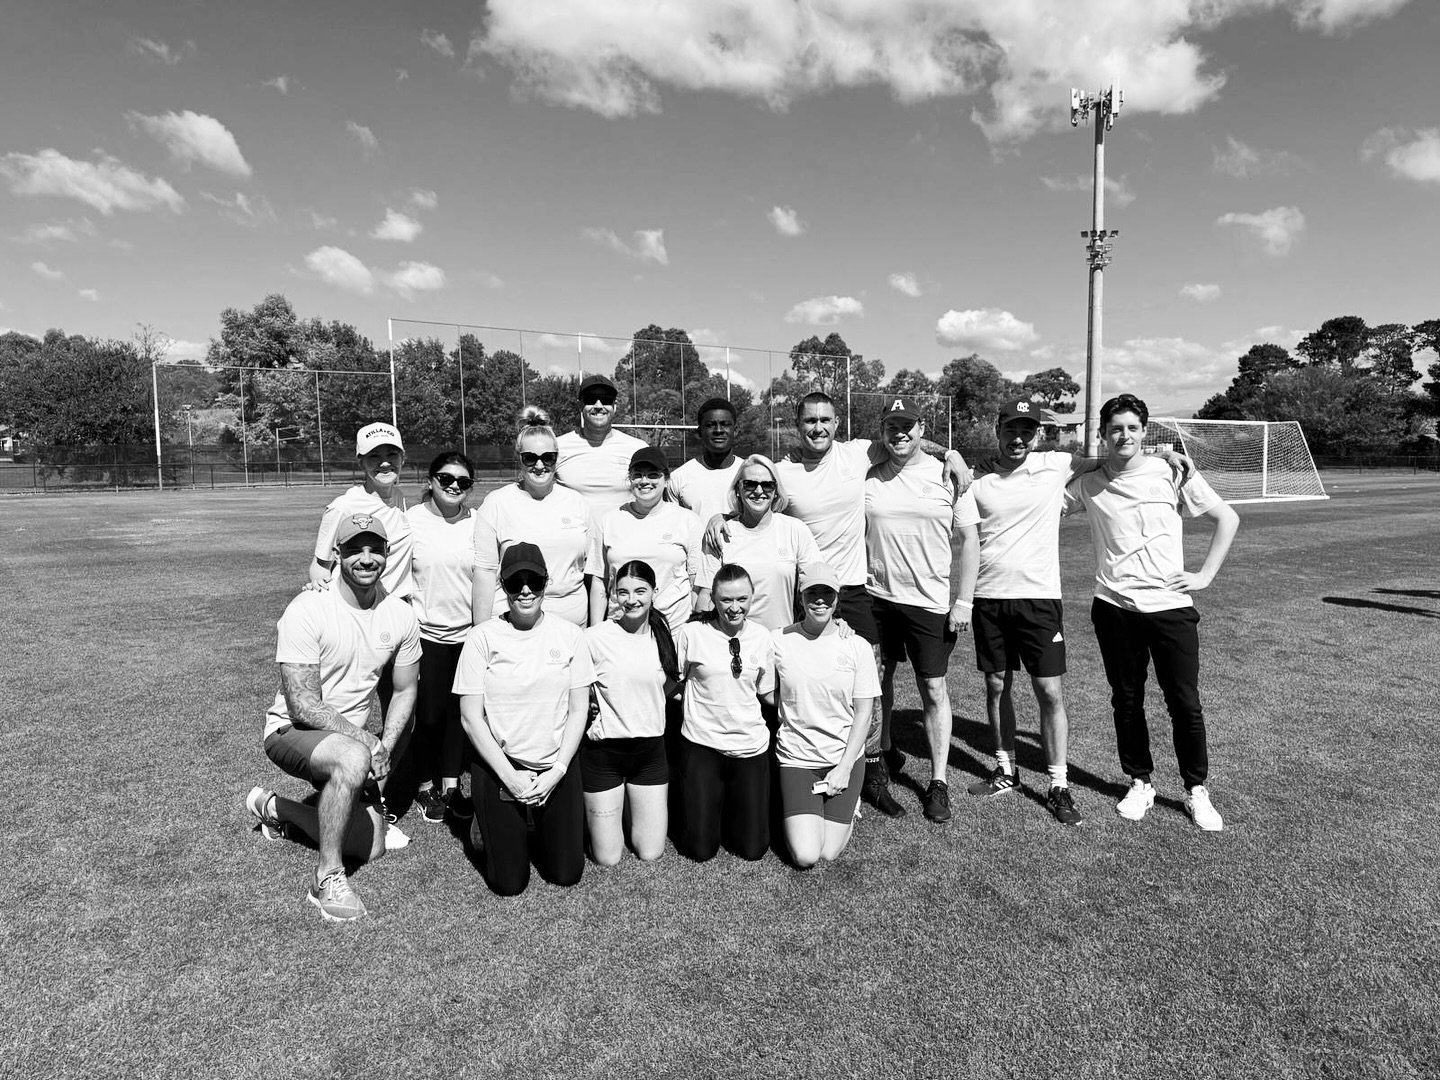 What you see &bull; A successful Terralympics: Raising funds to support families in need.

Last Friday, Hive participated in and sponsored the Terralympics, hosted by Terracon Legal in support of @roundaboutcanberra.
Their misision is to provide safe